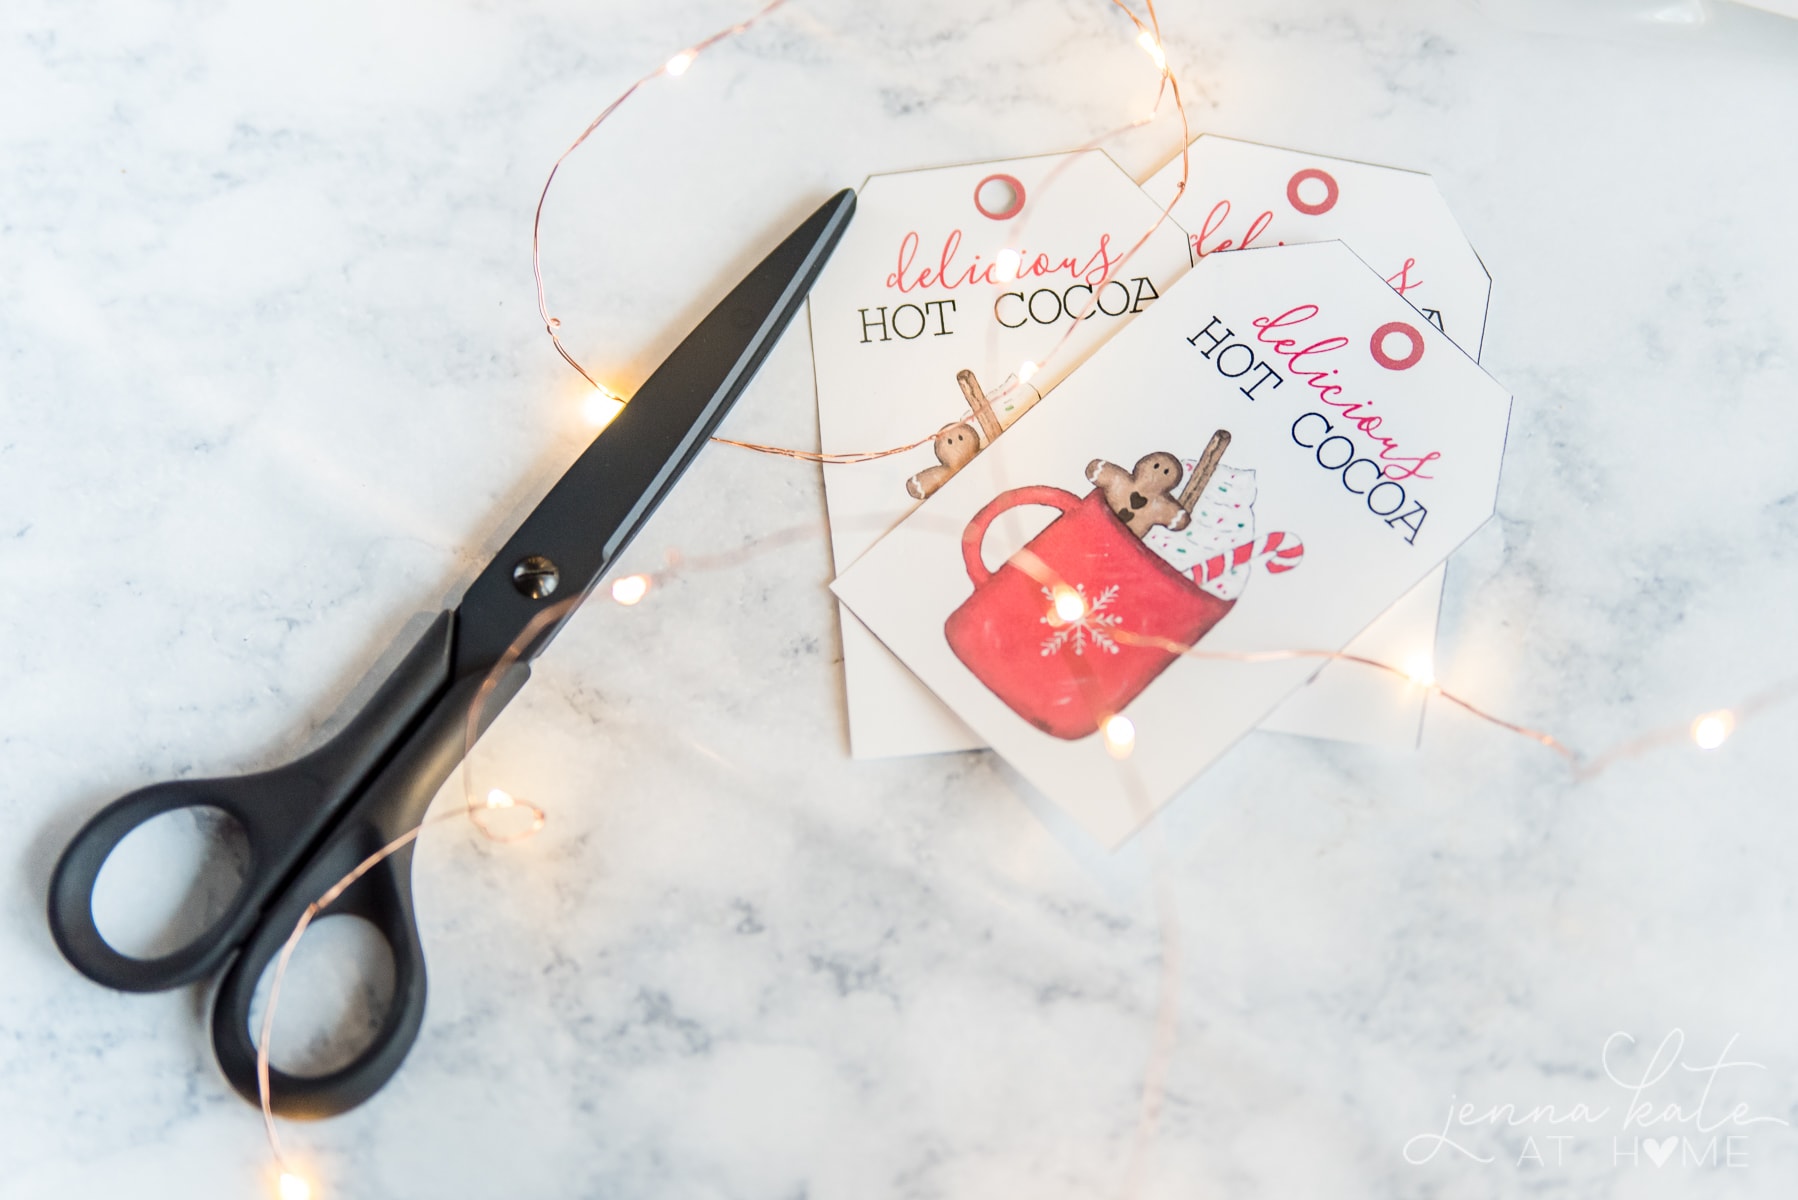 Printed gift tags cut out with a scissors